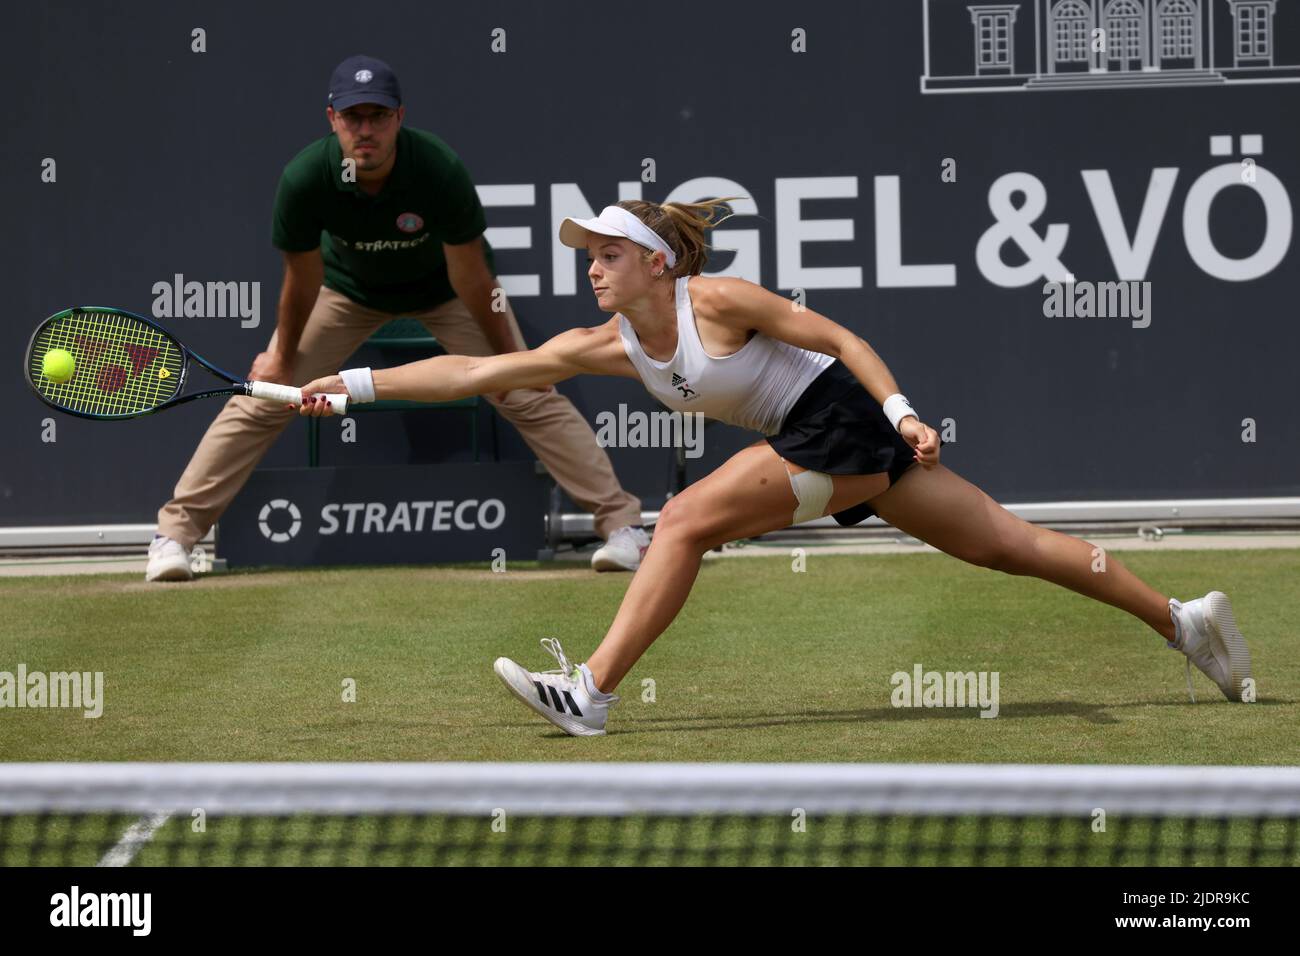 Bad Homburg, Germany. 22nd June, 2022. Tennis: WTA Tour, Singles, Women, Round of 16, Swan (Great Britain) - Andreescu (Canada). Katie Swan plays a forehand. Credit: Joaquim Ferreira/dpa/Alamy Live News Stock Photo